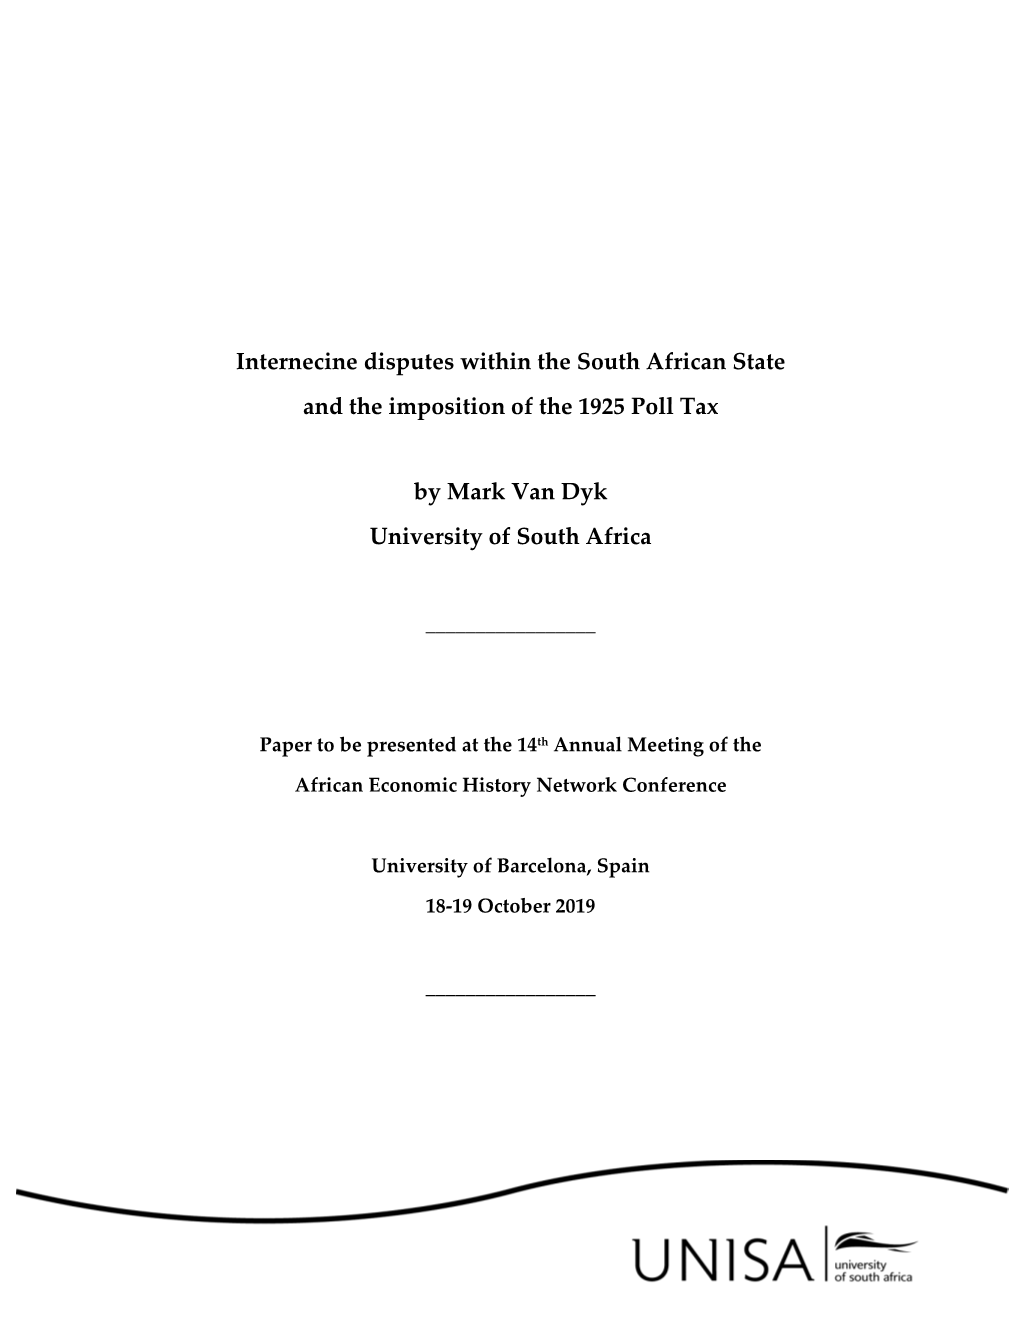 Internecine Disputes Within the South African State and the Imposition of the 1925 Poll Tax by Mark Van Dyk University of South